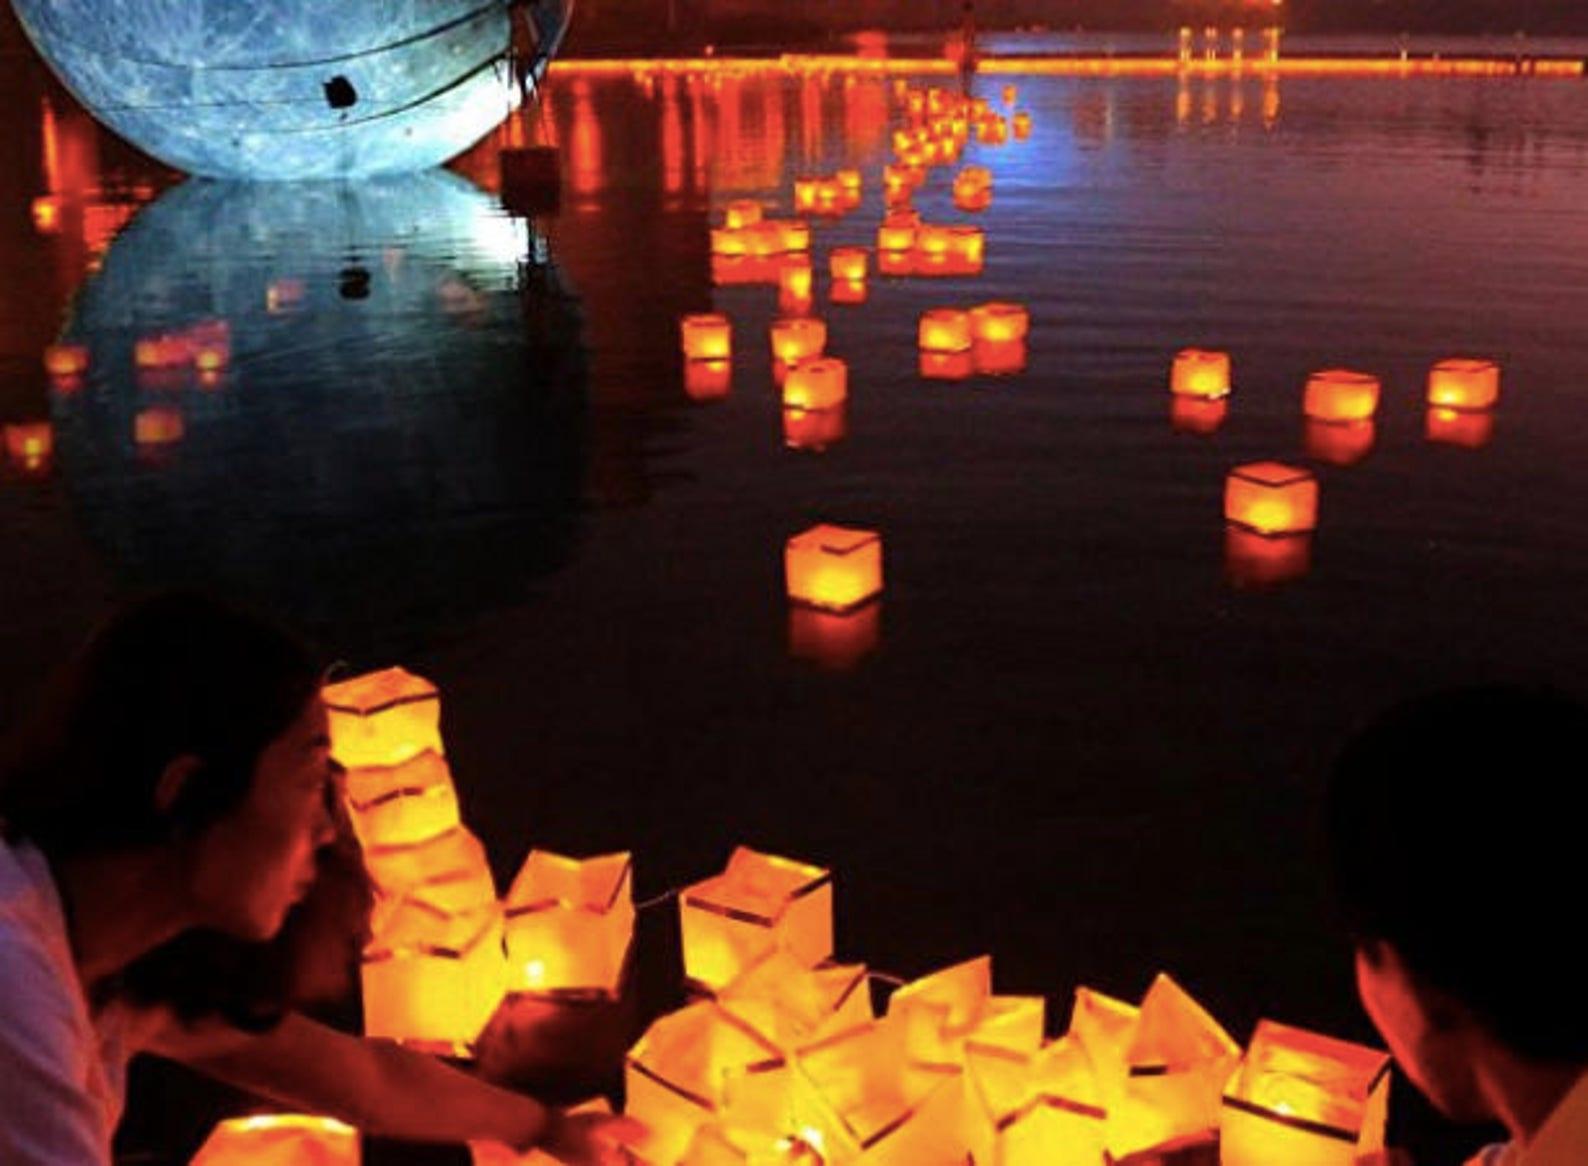 20pcs Gold Floating Square Water Lanterns Wishing Praying Floating River Candle Lights - Decotree.co Online Shop